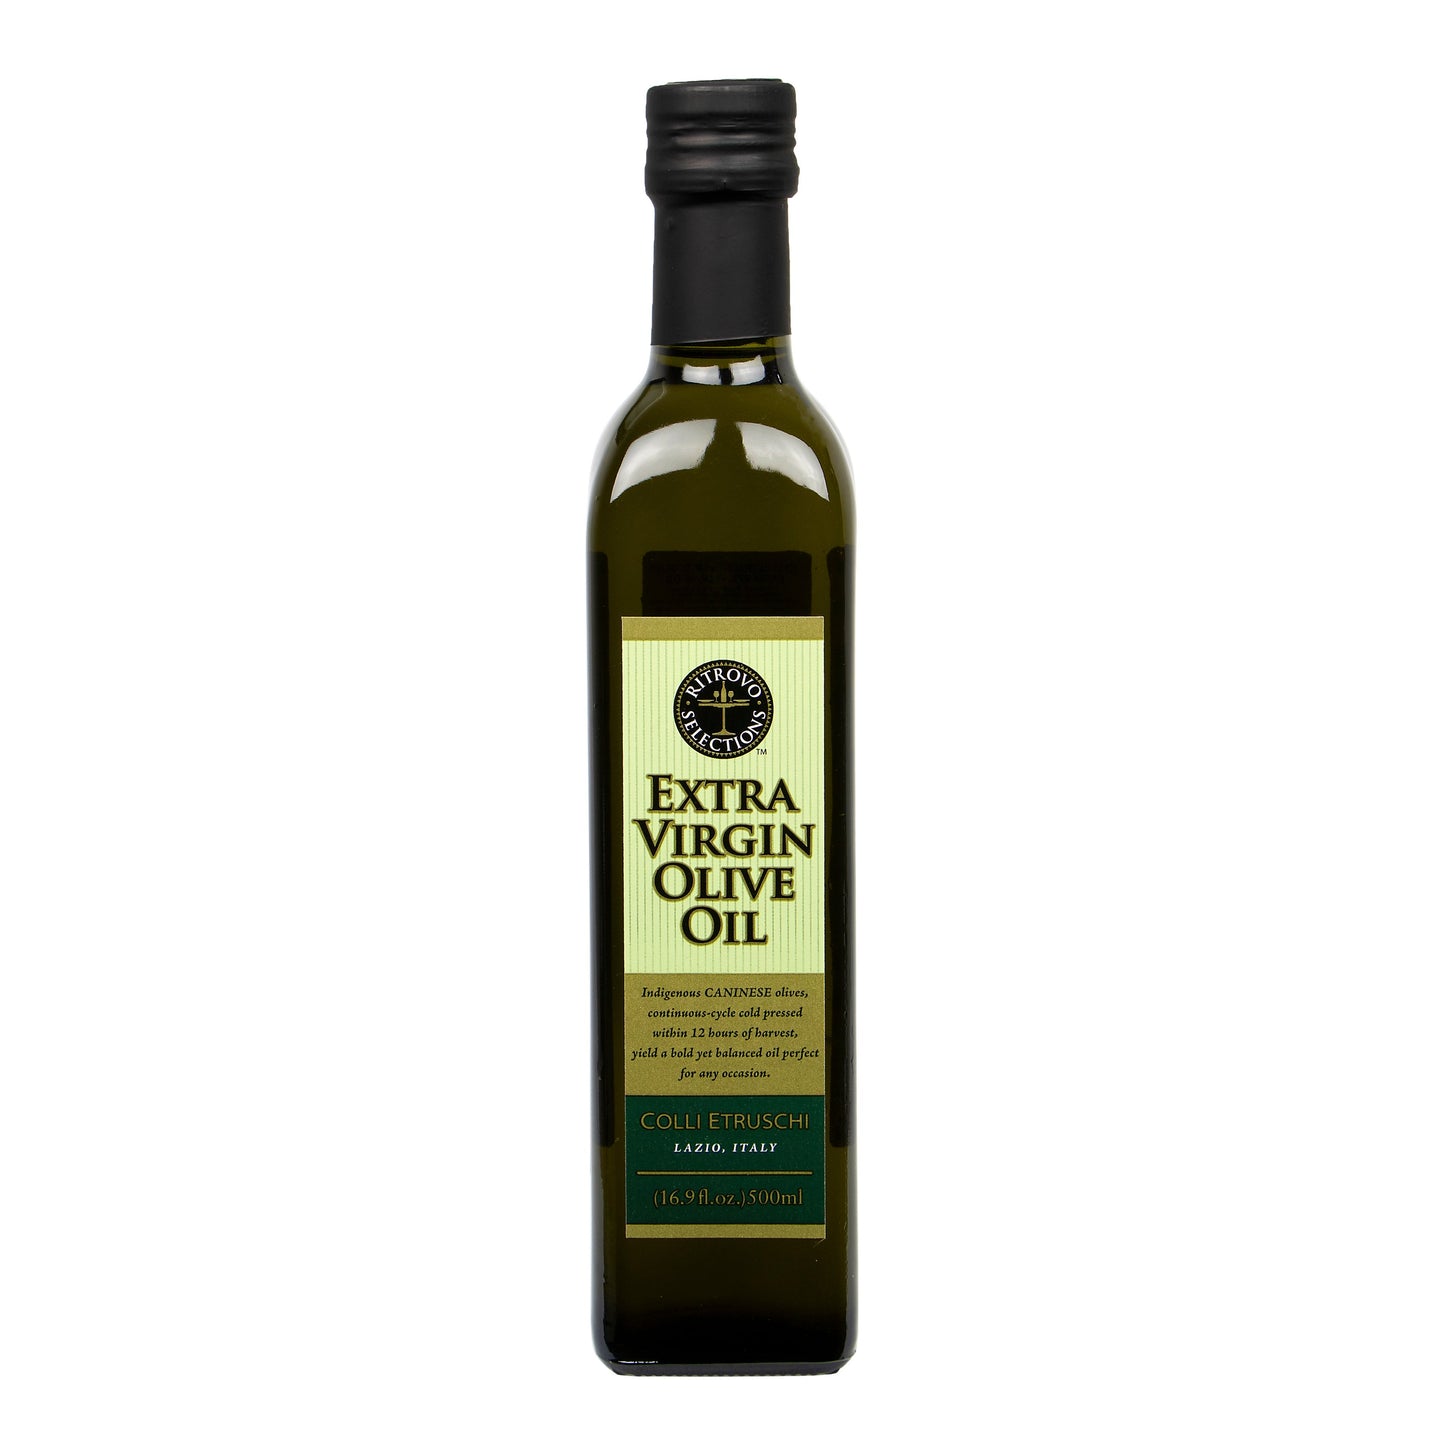 Colli Etruschi Chef's Selection Extra Virgin Olive Oil